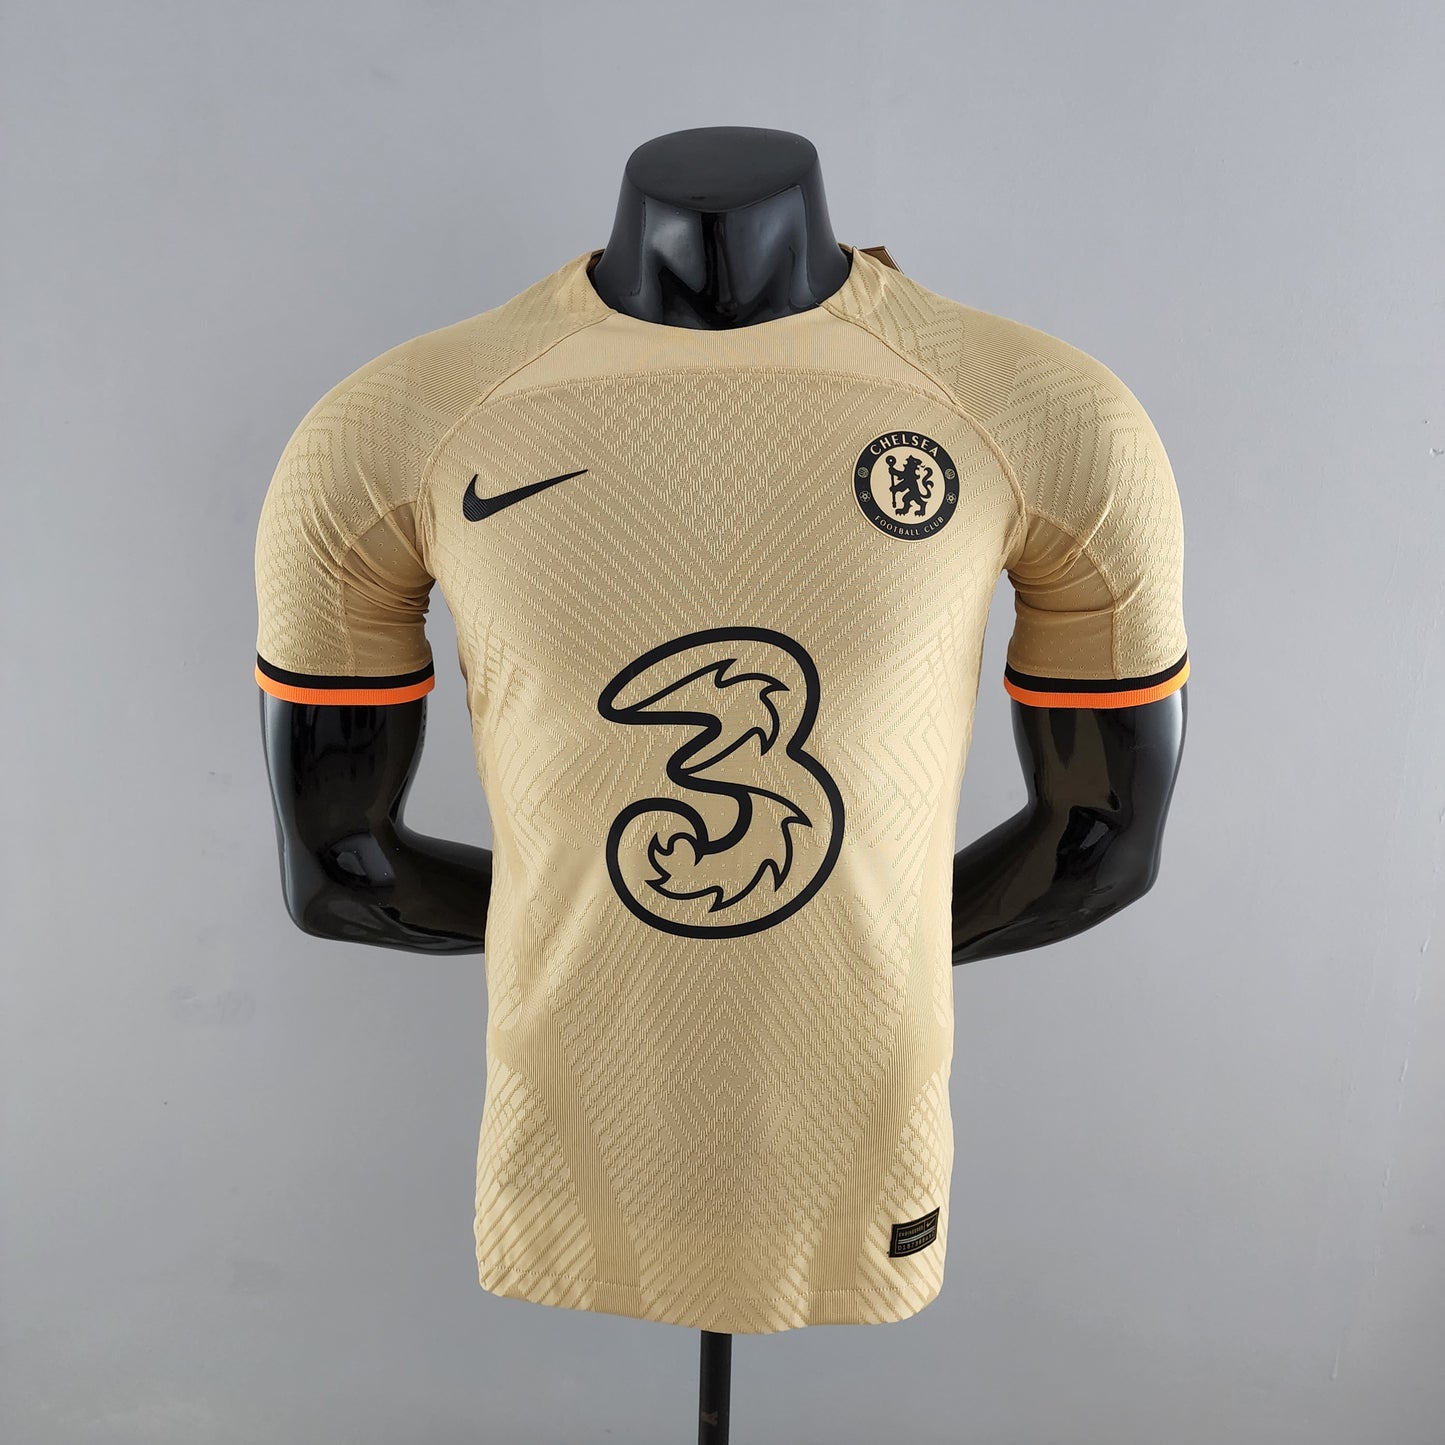 Chelsea Away 22/23 player Version Jersey